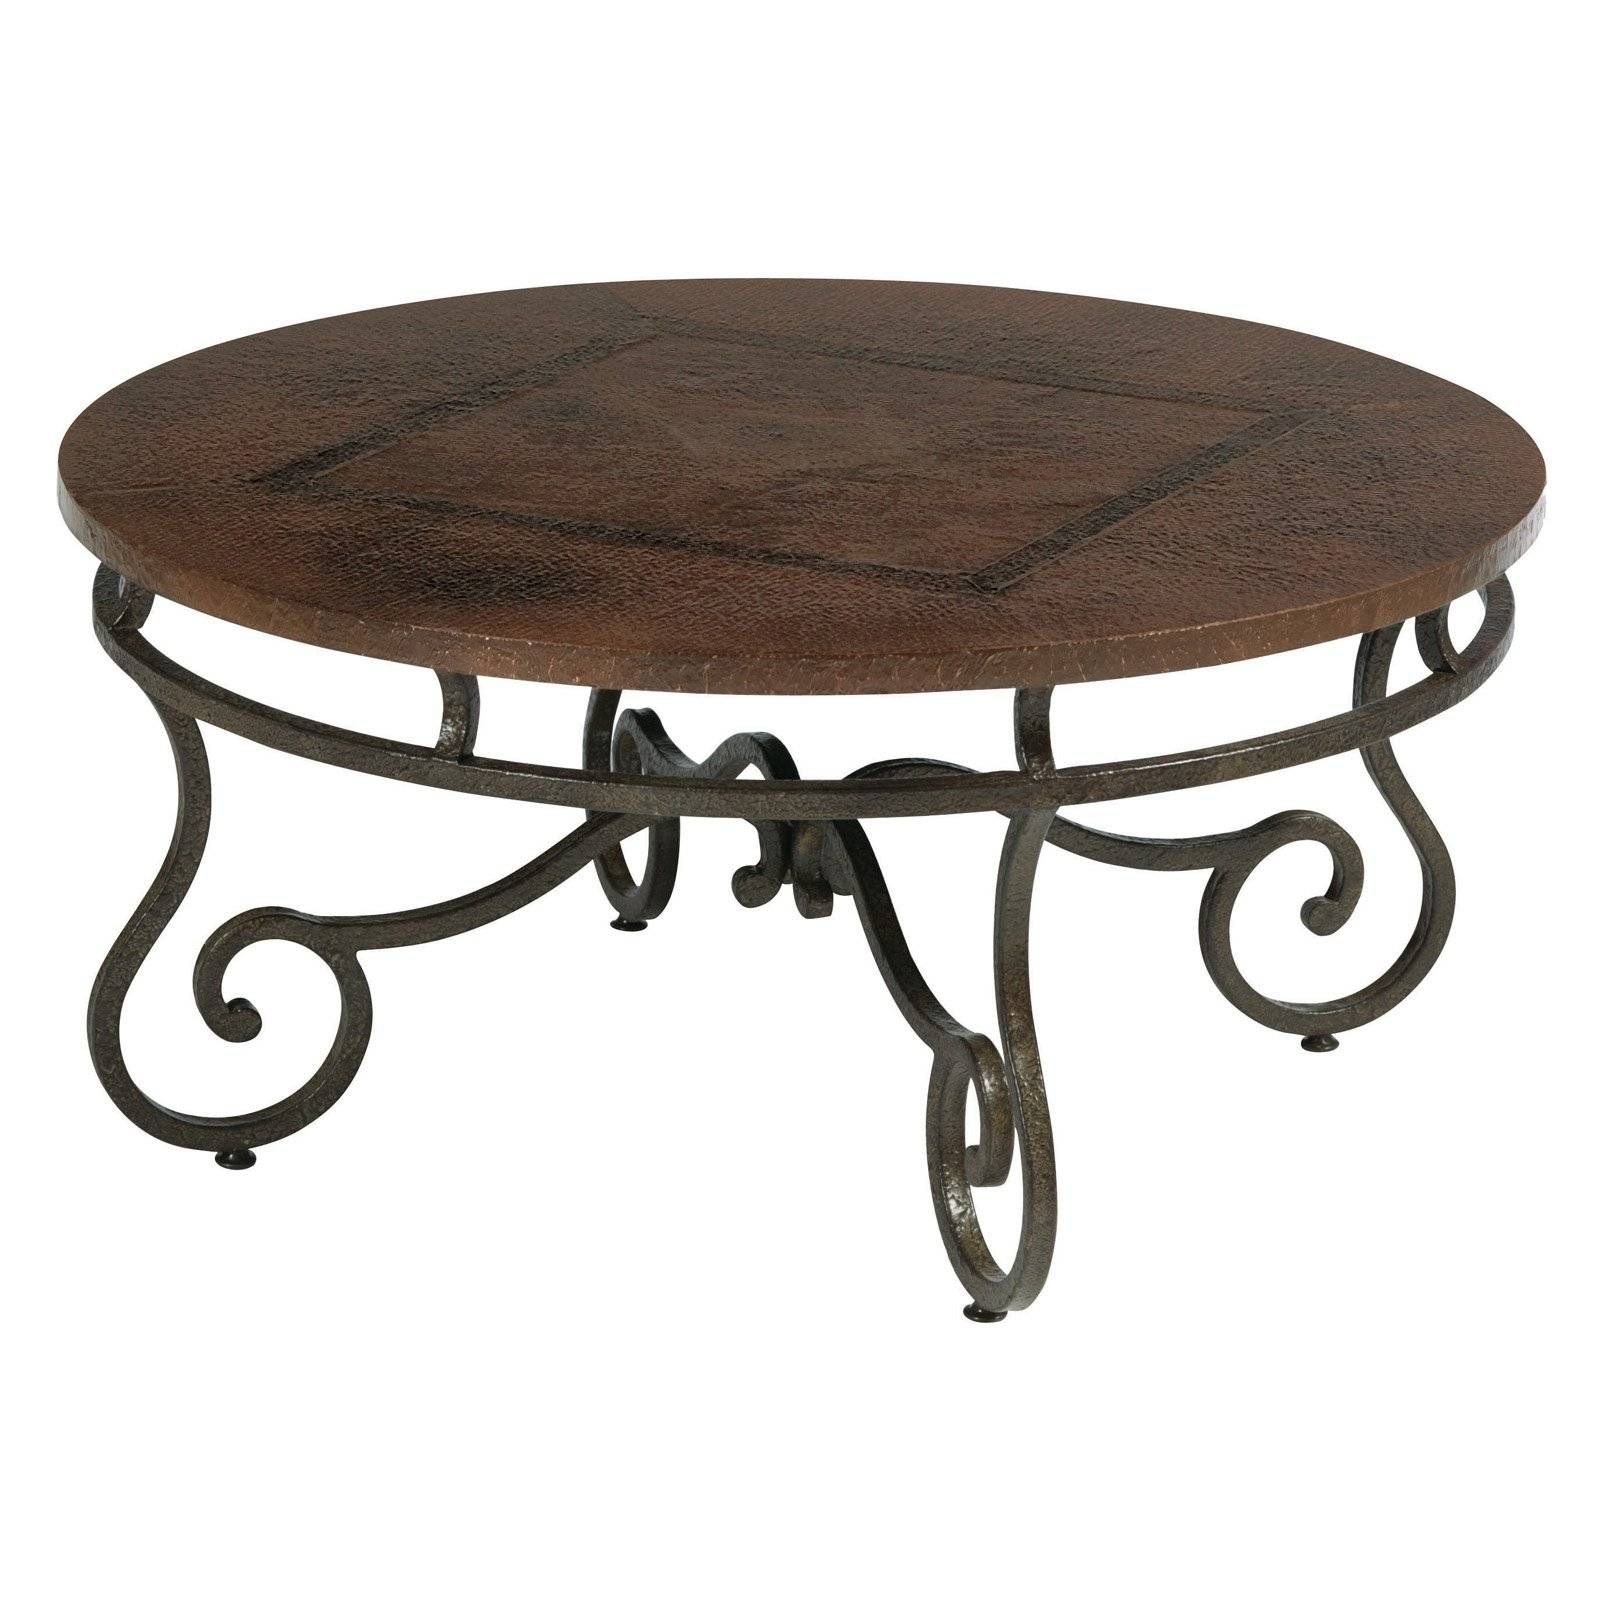 Round Metal Coffee Table: Sturdy And Attractive | Coffe Table Galleryx For Round Metal Coffee Tables (View 12 of 15)